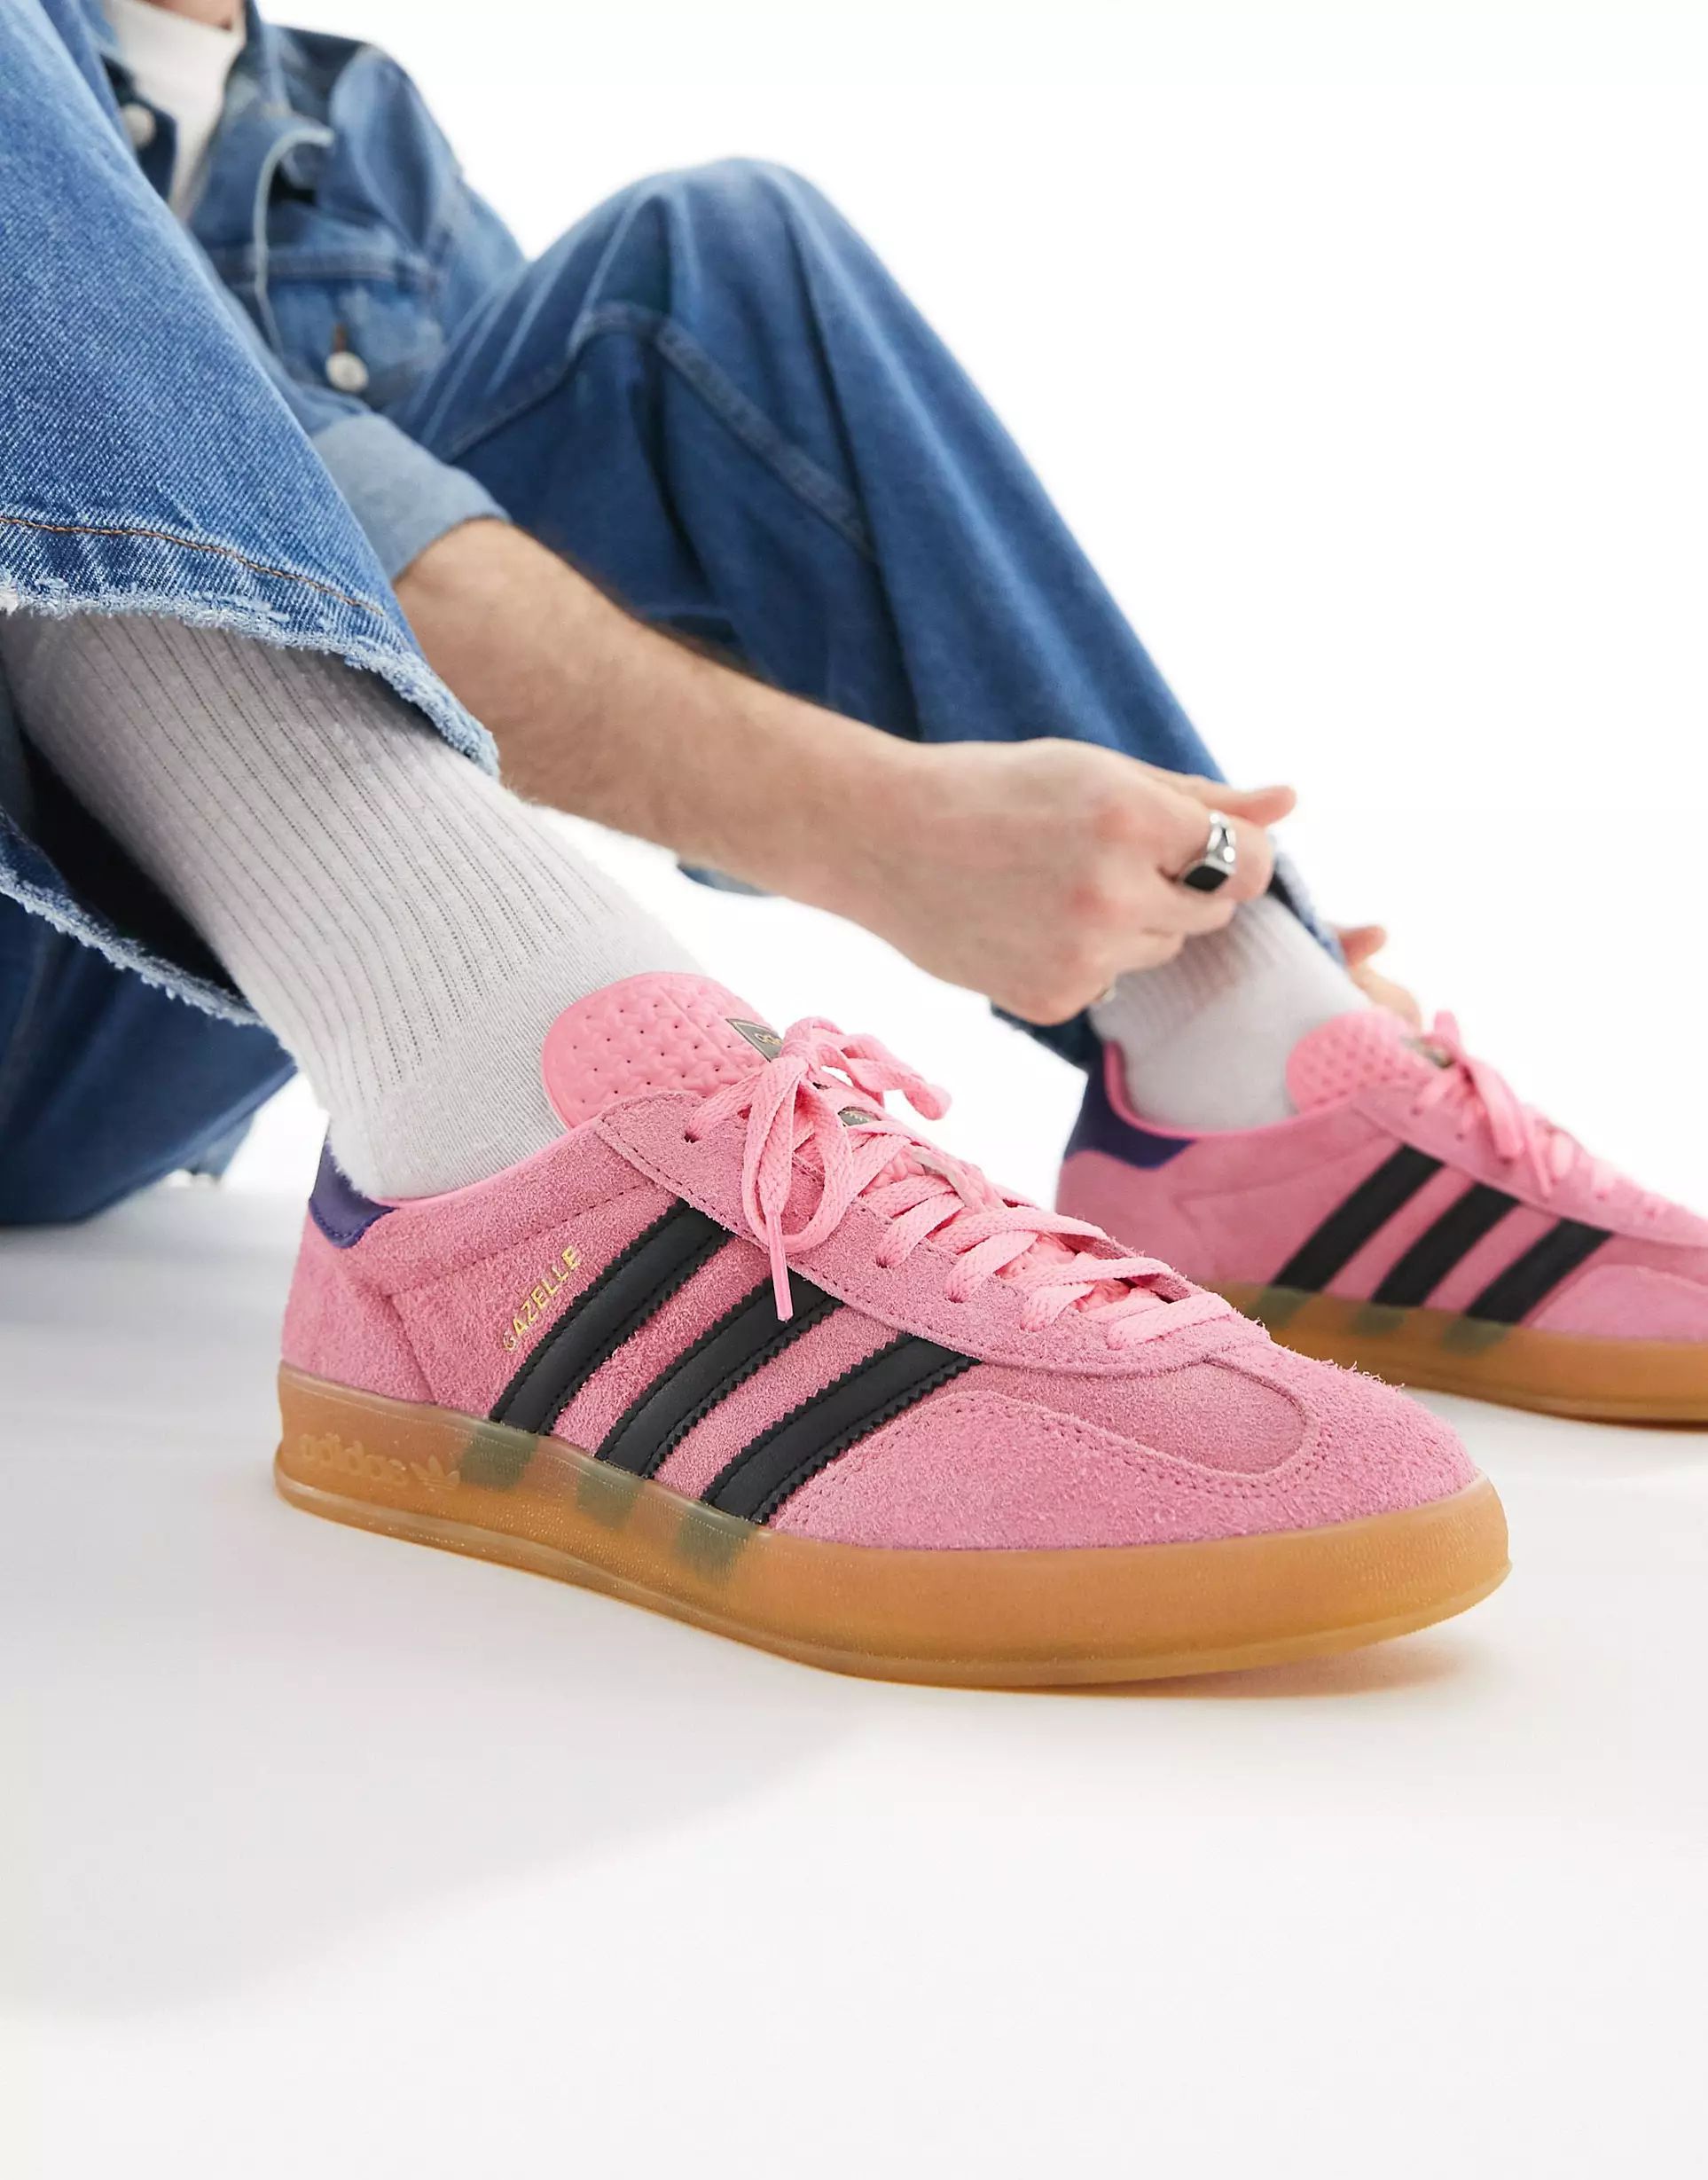 adidas Originals Gazelle Indoor trainers in pink and black with gum sole | ASOS (Global)